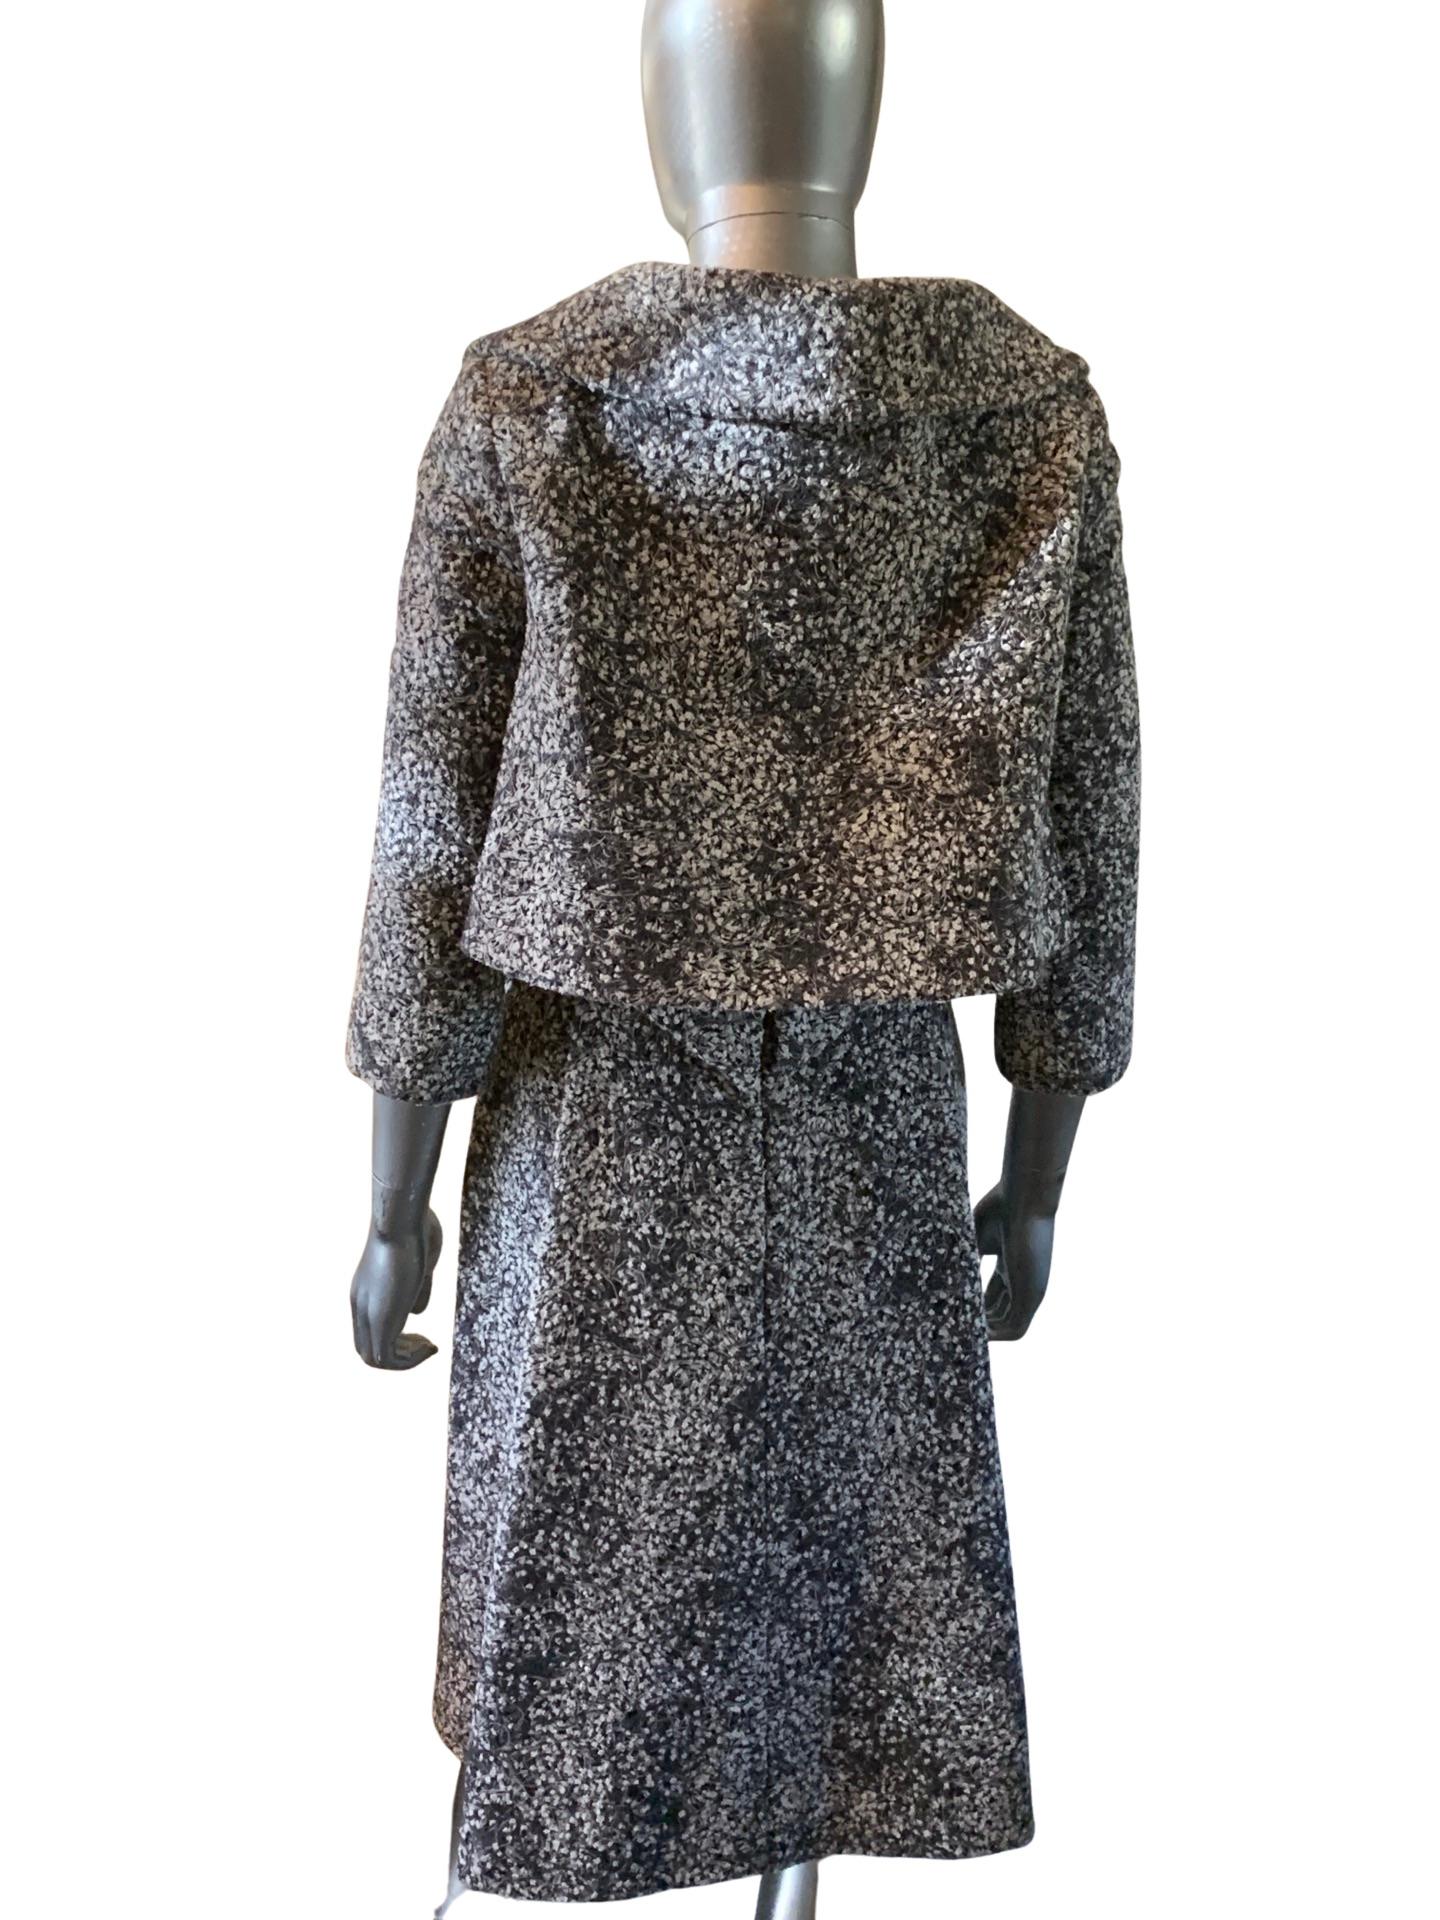 Italian Bouclé Dress and Jacket Set by Peter Langner Saks Fifth Avenue Size 6  For Sale 14